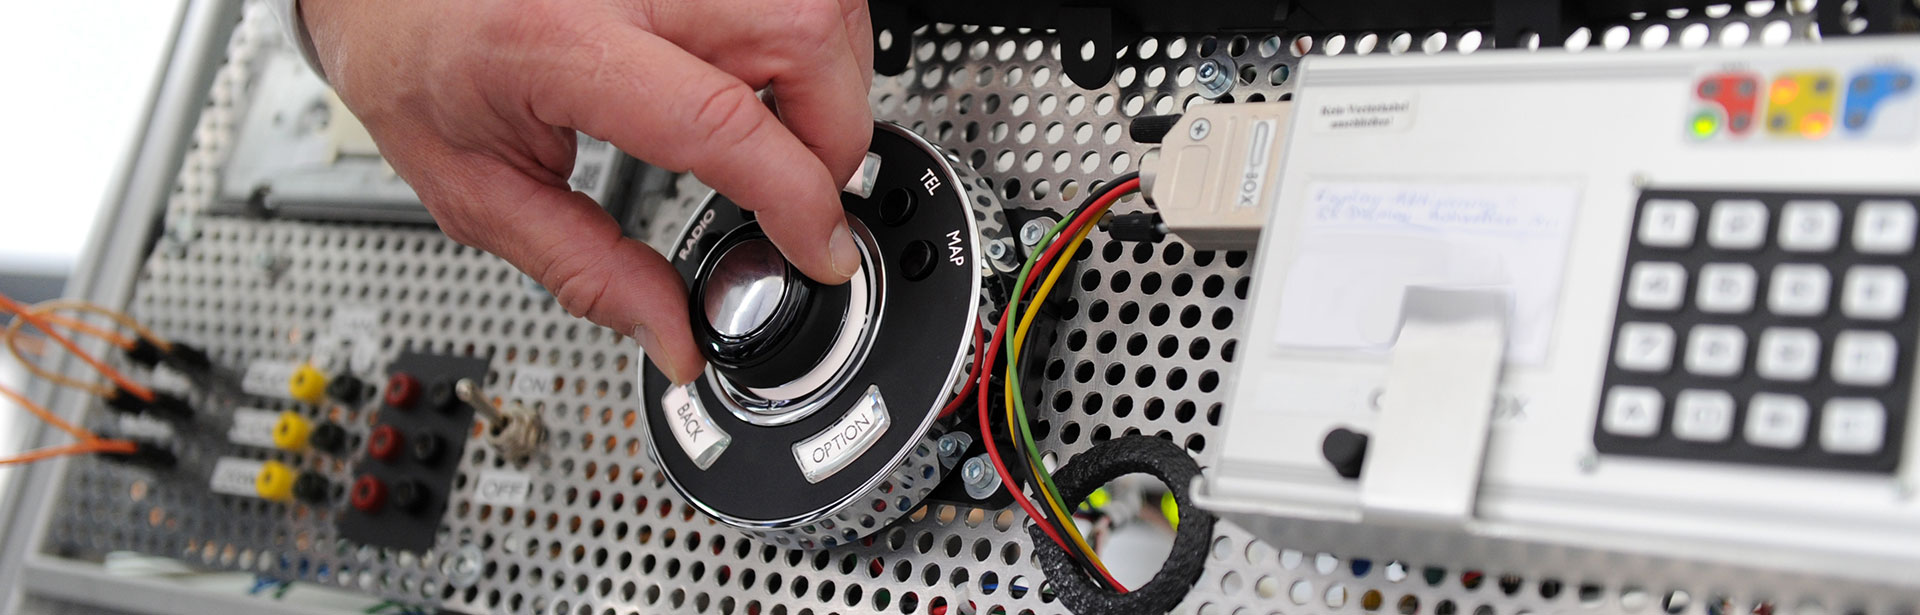 Close-up of the operation of an eletronic device